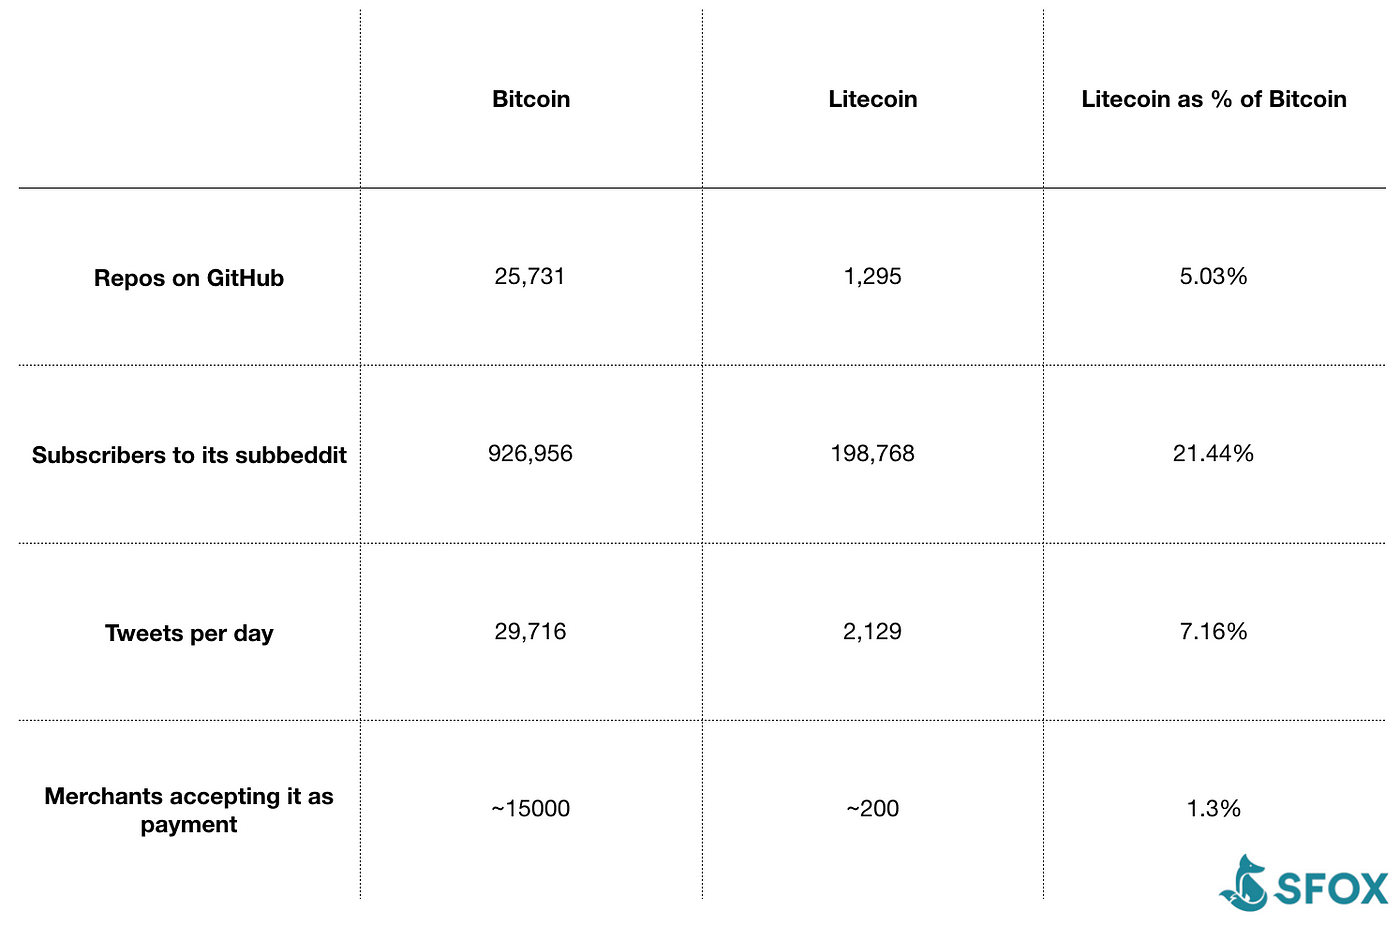 Litecoin Vs Bitcoin The Story Of The Most Successful Bitcoin Clone - 